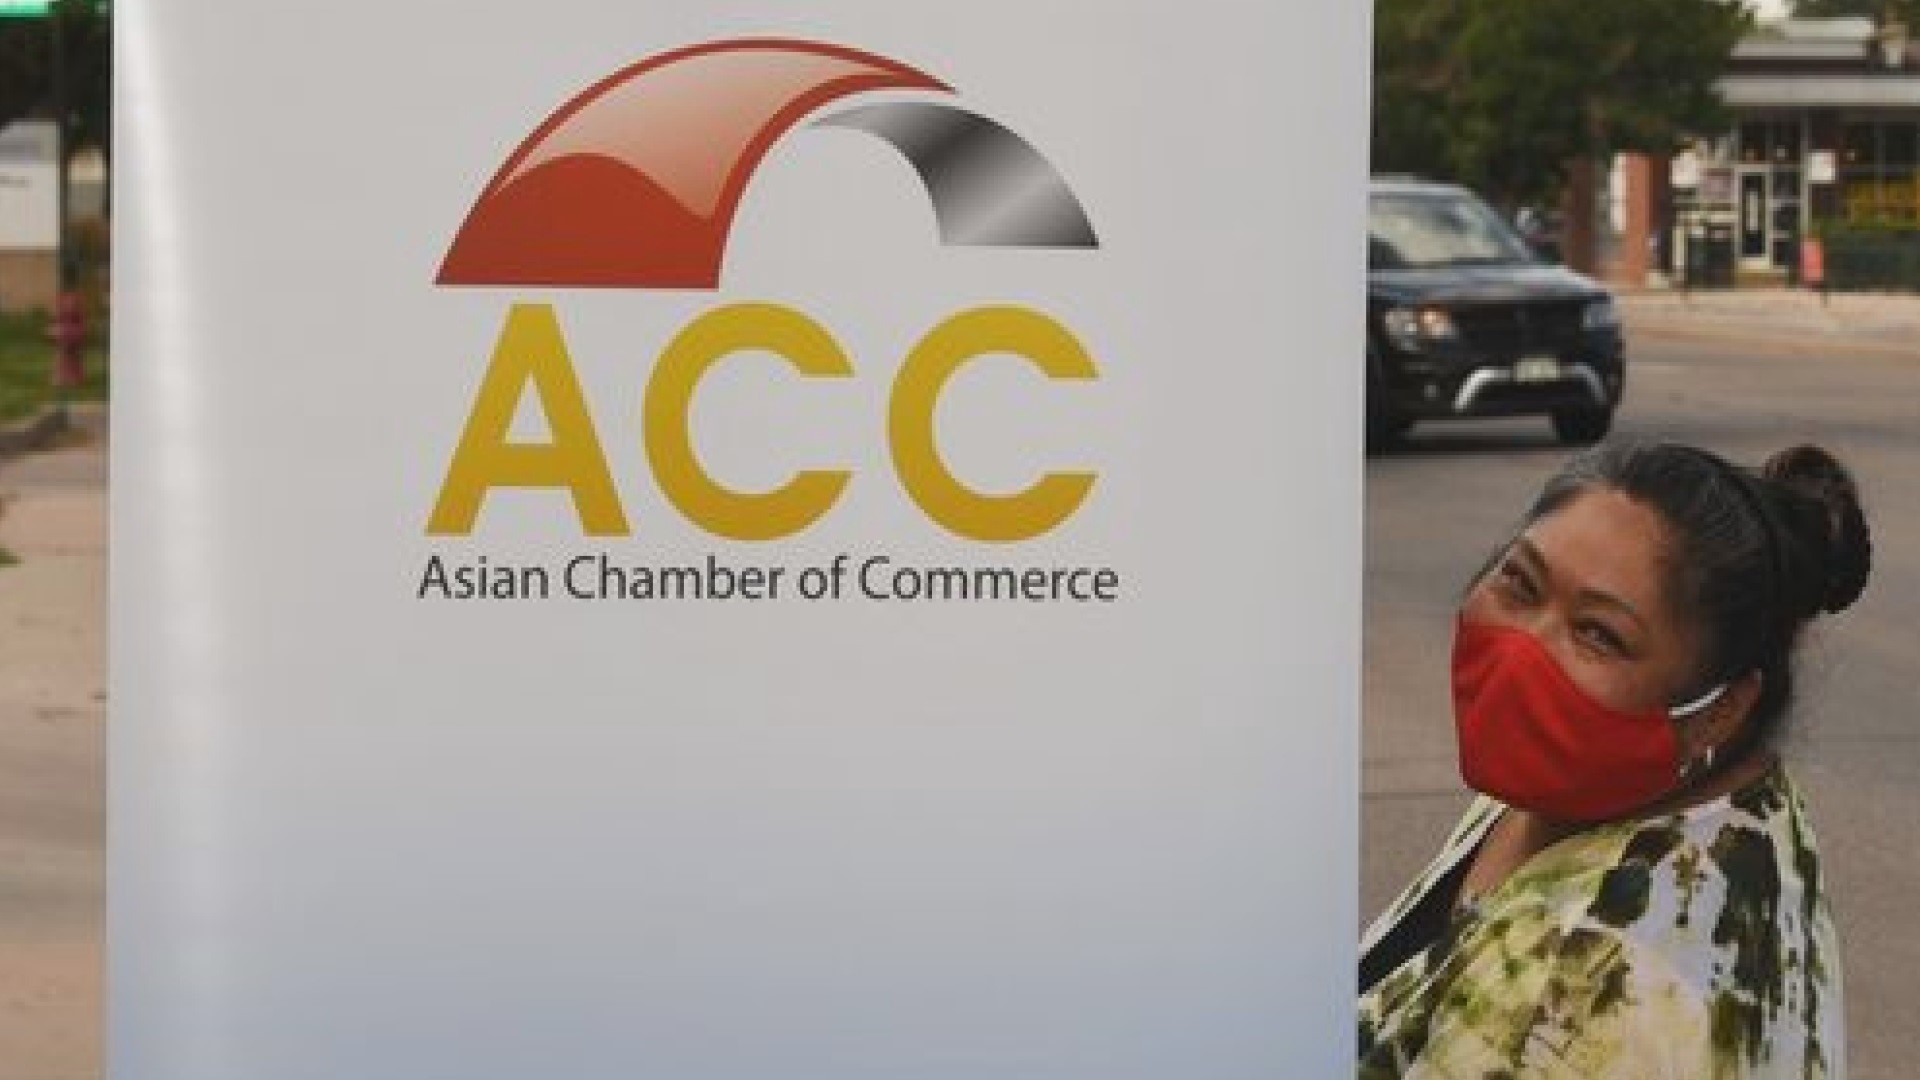 Mary Monzon was a dedicated member of the Asian Chamber of Commerce for more than 20 years.